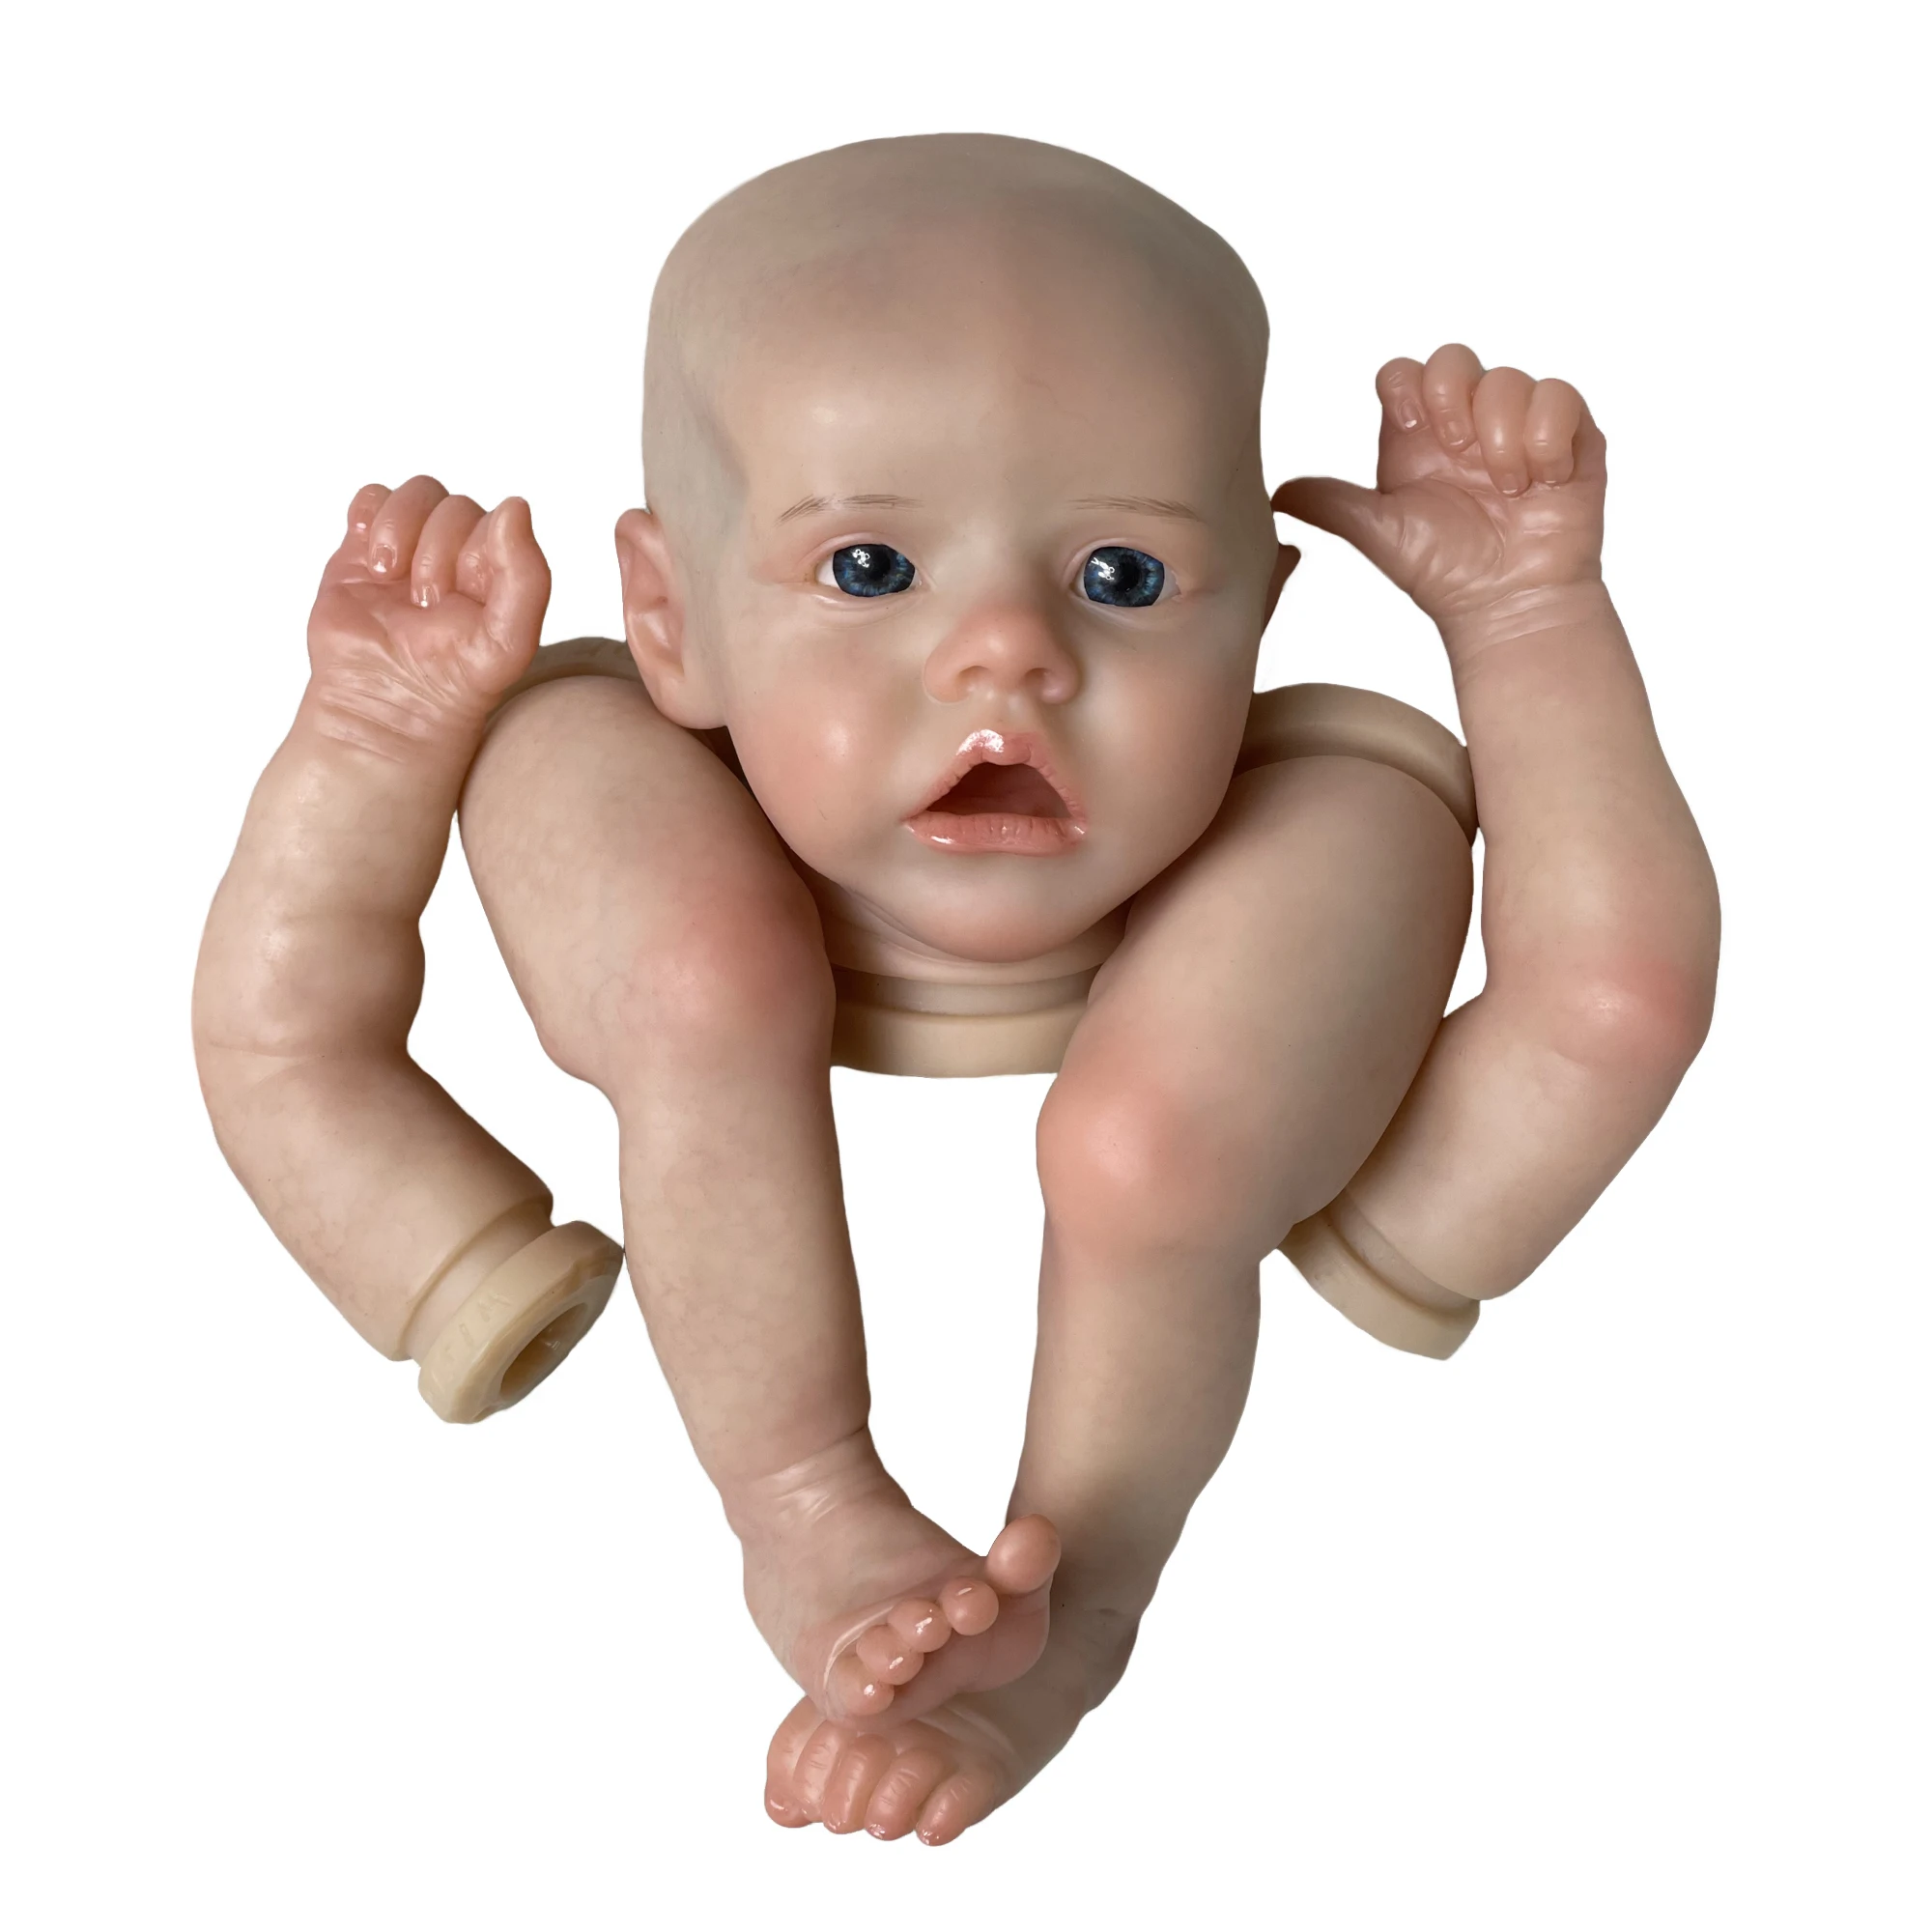 Træde tilbage barbering sladre Wholesale Open Eyes Twins Reborn Doll Kits 40CM Soft Vinyl Silicone Bebe  Reborn Realistic Painted Unfinished Reborn Doll Parts Kit From m.alibaba.com